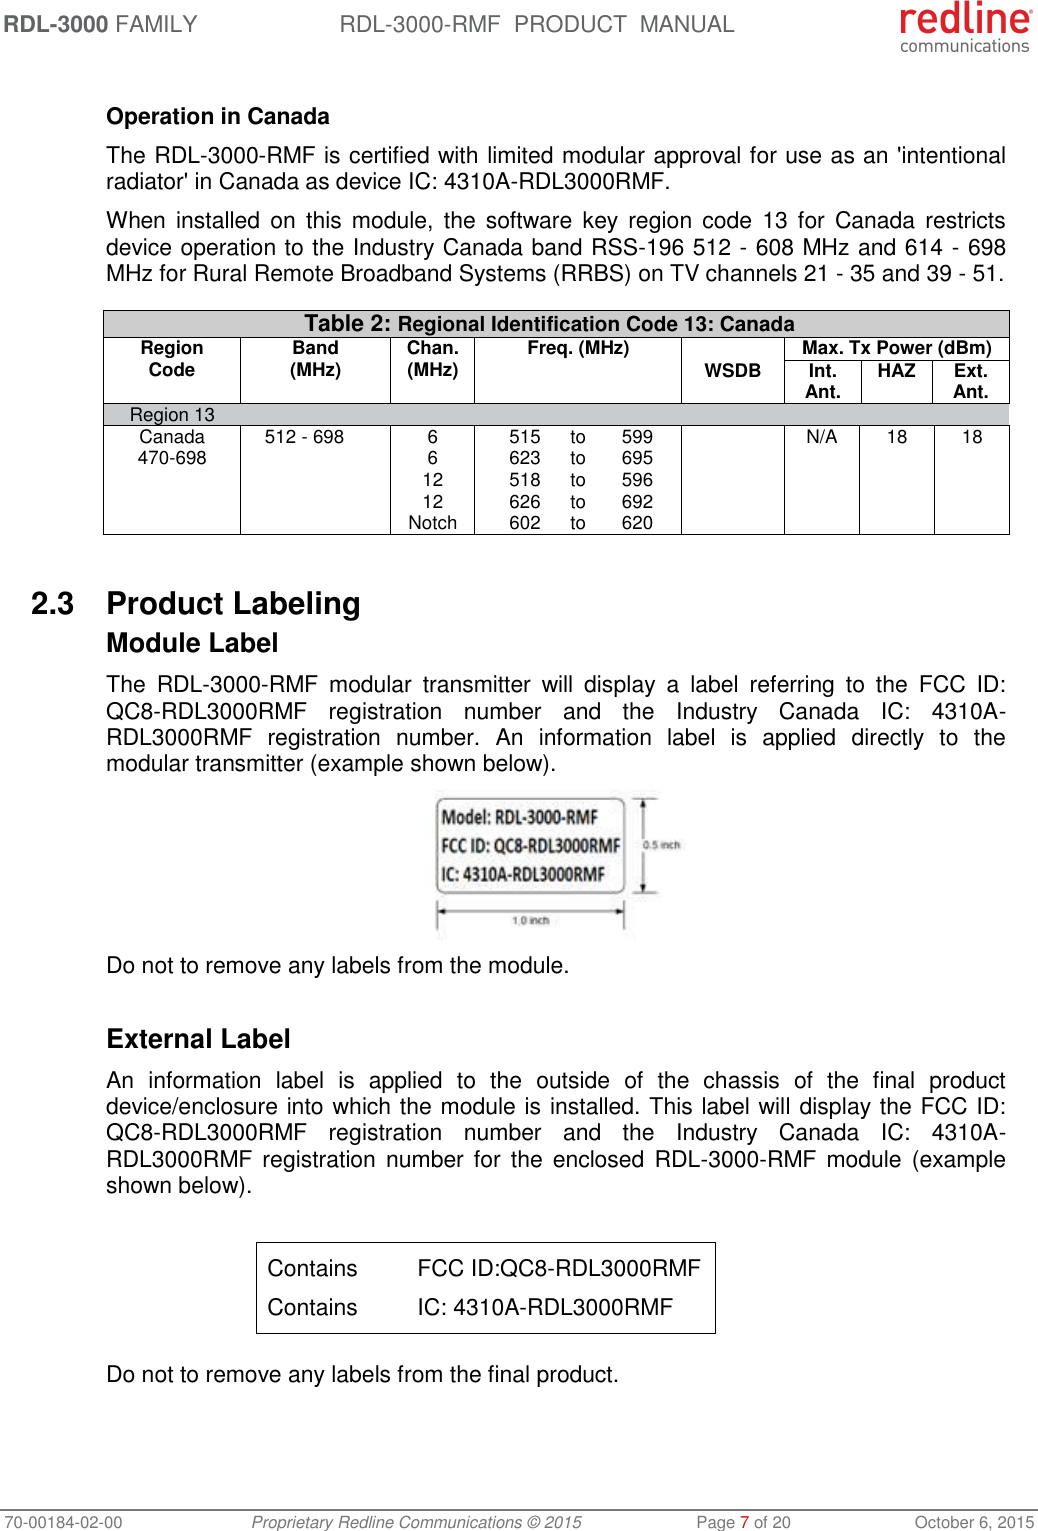 RDL-3000 FAMILY RDL-3000-RMF  PRODUCT  MANUAL 70-00184-02-00 Proprietary Redline Communications © 2015  Page 7 of 20  October 6, 2015  Operation in Canada The RDL-3000-RMF is certified with limited modular approval for use as an &apos;intentional radiator&apos; in Canada as device IC: 4310A-RDL3000RMF. When  installed on  this  module,  the software  key region  code  13  for  Canada restricts device operation to the Industry Canada band RSS-196 512 - 608 MHz and 614 - 698 MHz for Rural Remote Broadband Systems (RRBS) on TV channels 21 - 35 and 39 - 51.  Table 2: Regional Identification Code 13: Canada Region Code Band (MHz) Chan. (MHz) Freq. (MHz)  Max. Tx Power (dBm) WSDB Int. Ant.  HAZ Ext. Ant. Region 13        Canada  512 - 698 6  515 to 599  N/A 18 18 470-698  6  623 to 695       12  518 to 596       12  626 to 692       Notch  602 to 620      2.3  Product Labeling Module Label The  RDL-3000-RMF  modular  transmitter  will  display  a  label  referring  to  the  FCC  ID: QC8-RDL3000RMF  registration  number  and  the  Industry  Canada  IC:  4310A-RDL3000RMF  registration  number.  An  information  label  is  applied  directly  to  the modular transmitter (example shown below).  Do not to remove any labels from the module.  External Label An  information  label  is  applied  to  the  outside  of  the  chassis  of  the  final  product device/enclosure into which the module is installed. This label will display the FCC ID: QC8-RDL3000RMF  registration  number  and  the  Industry  Canada  IC:  4310A-RDL3000RMF  registration number  for  the enclosed  RDL-3000-RMF module  (example shown below).  Contains  FCC ID:QC8-RDL3000RMF Contains  IC: 4310A-RDL3000RMF  Do not to remove any labels from the final product. 